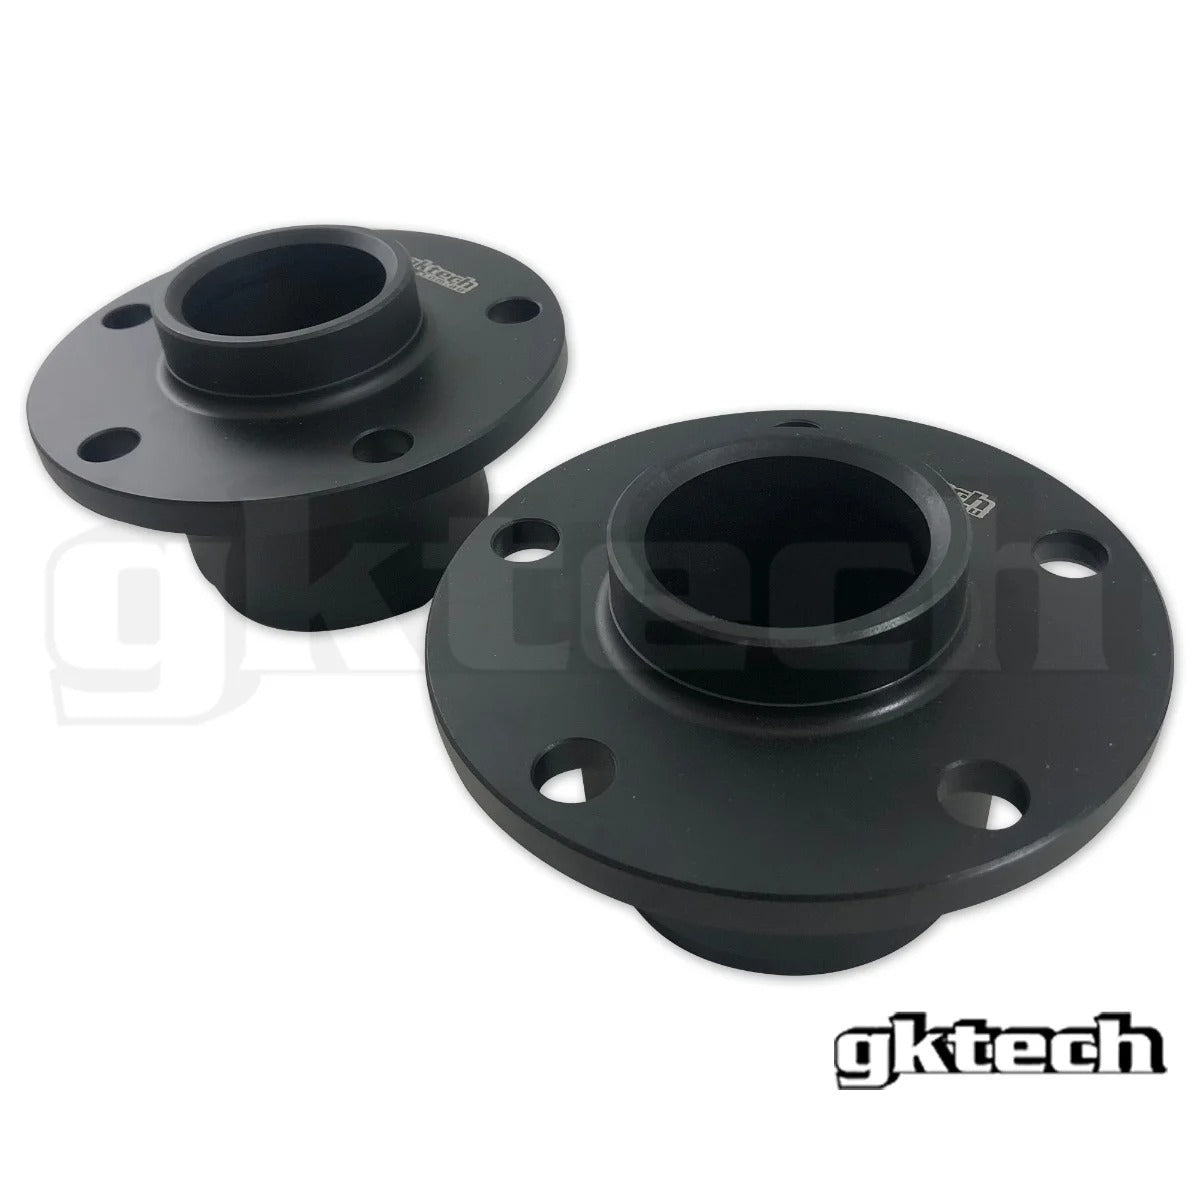 S13 Silvia/180sx 4 to 5 stud front conversion hubs (PAIR)